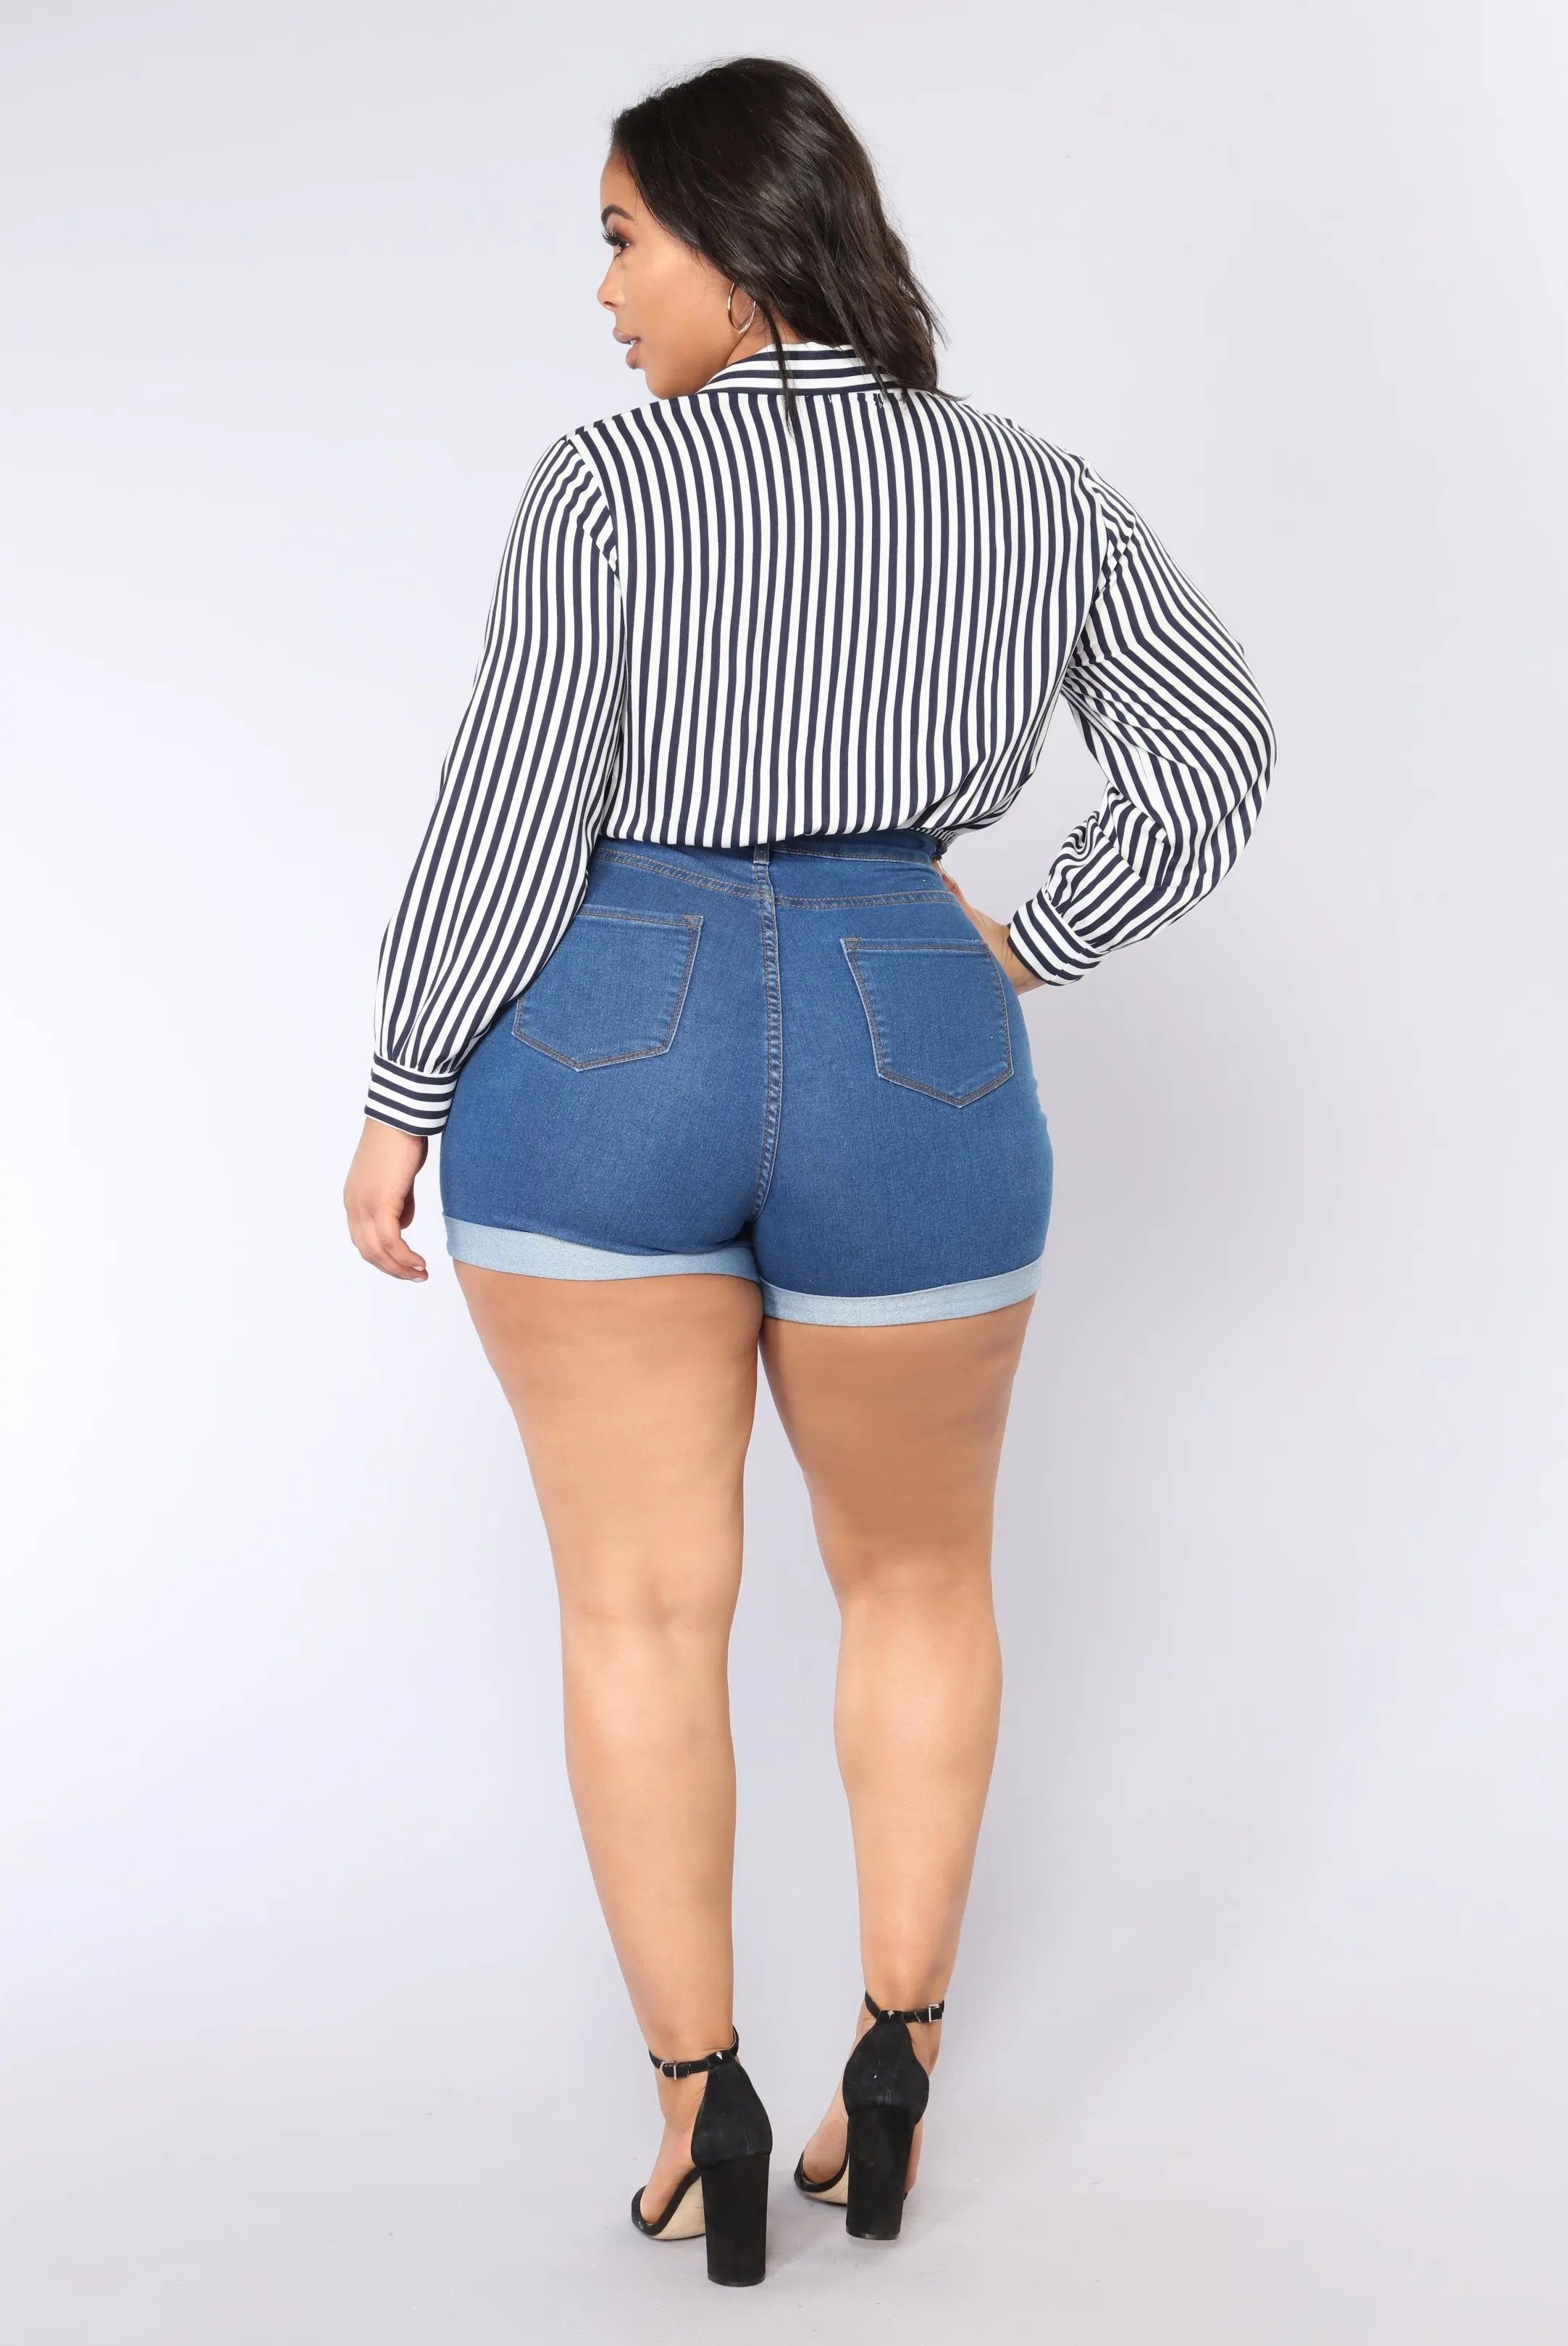 jeans for short fat ladies